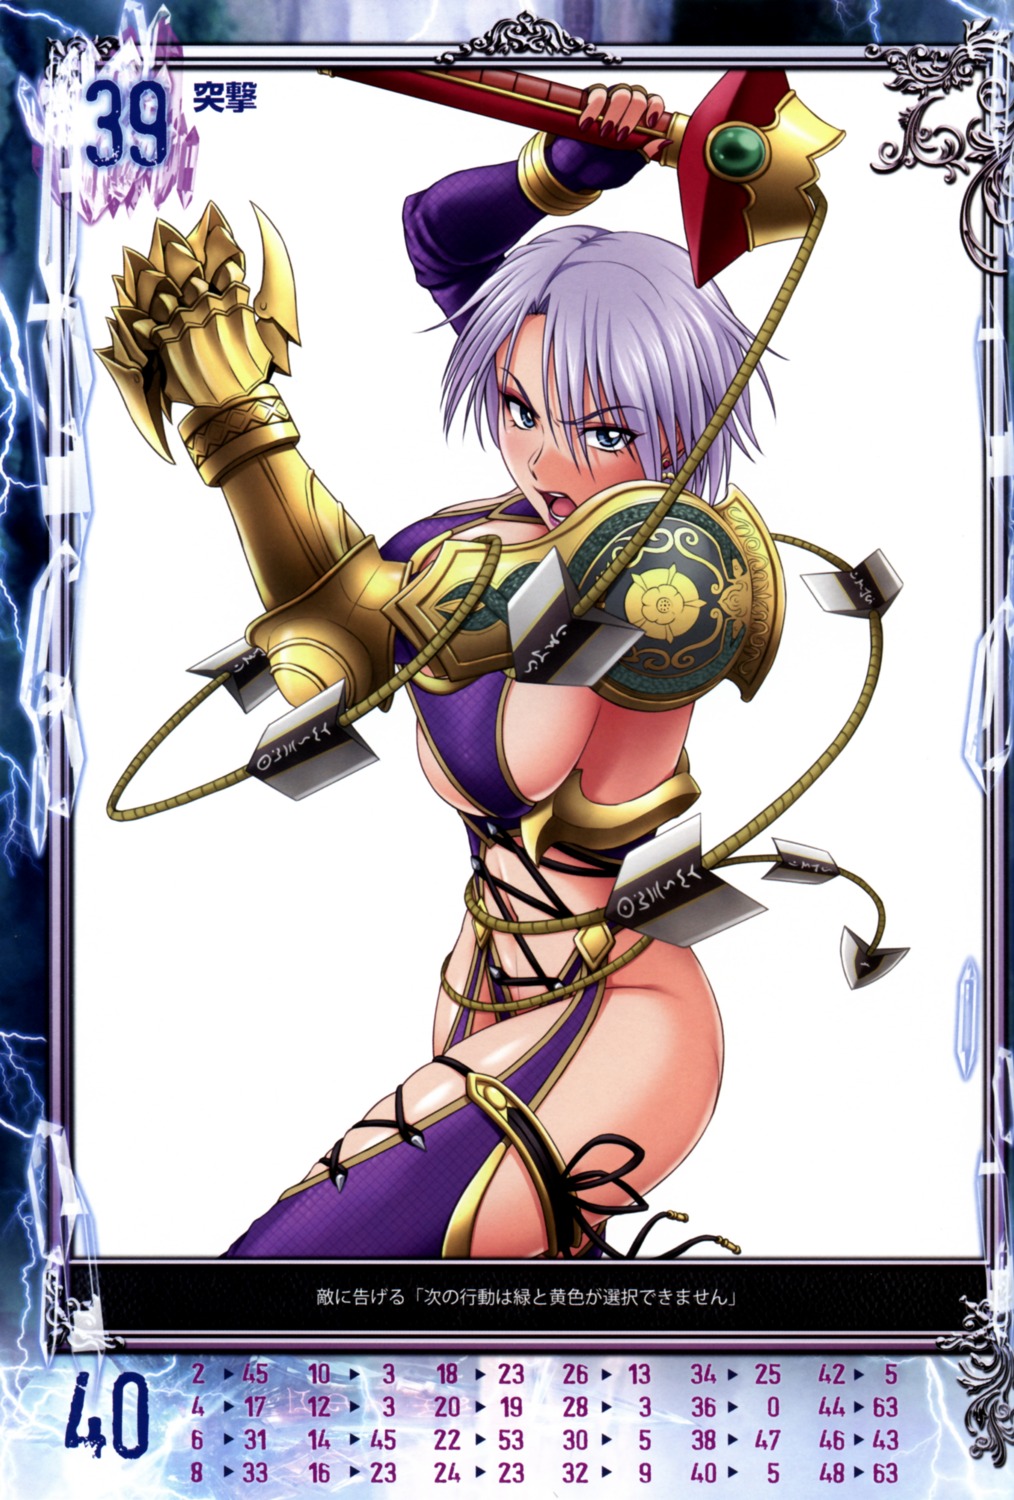 armor ivy_valentine nigou overfiltered queen's_gate soul_calibur weapon